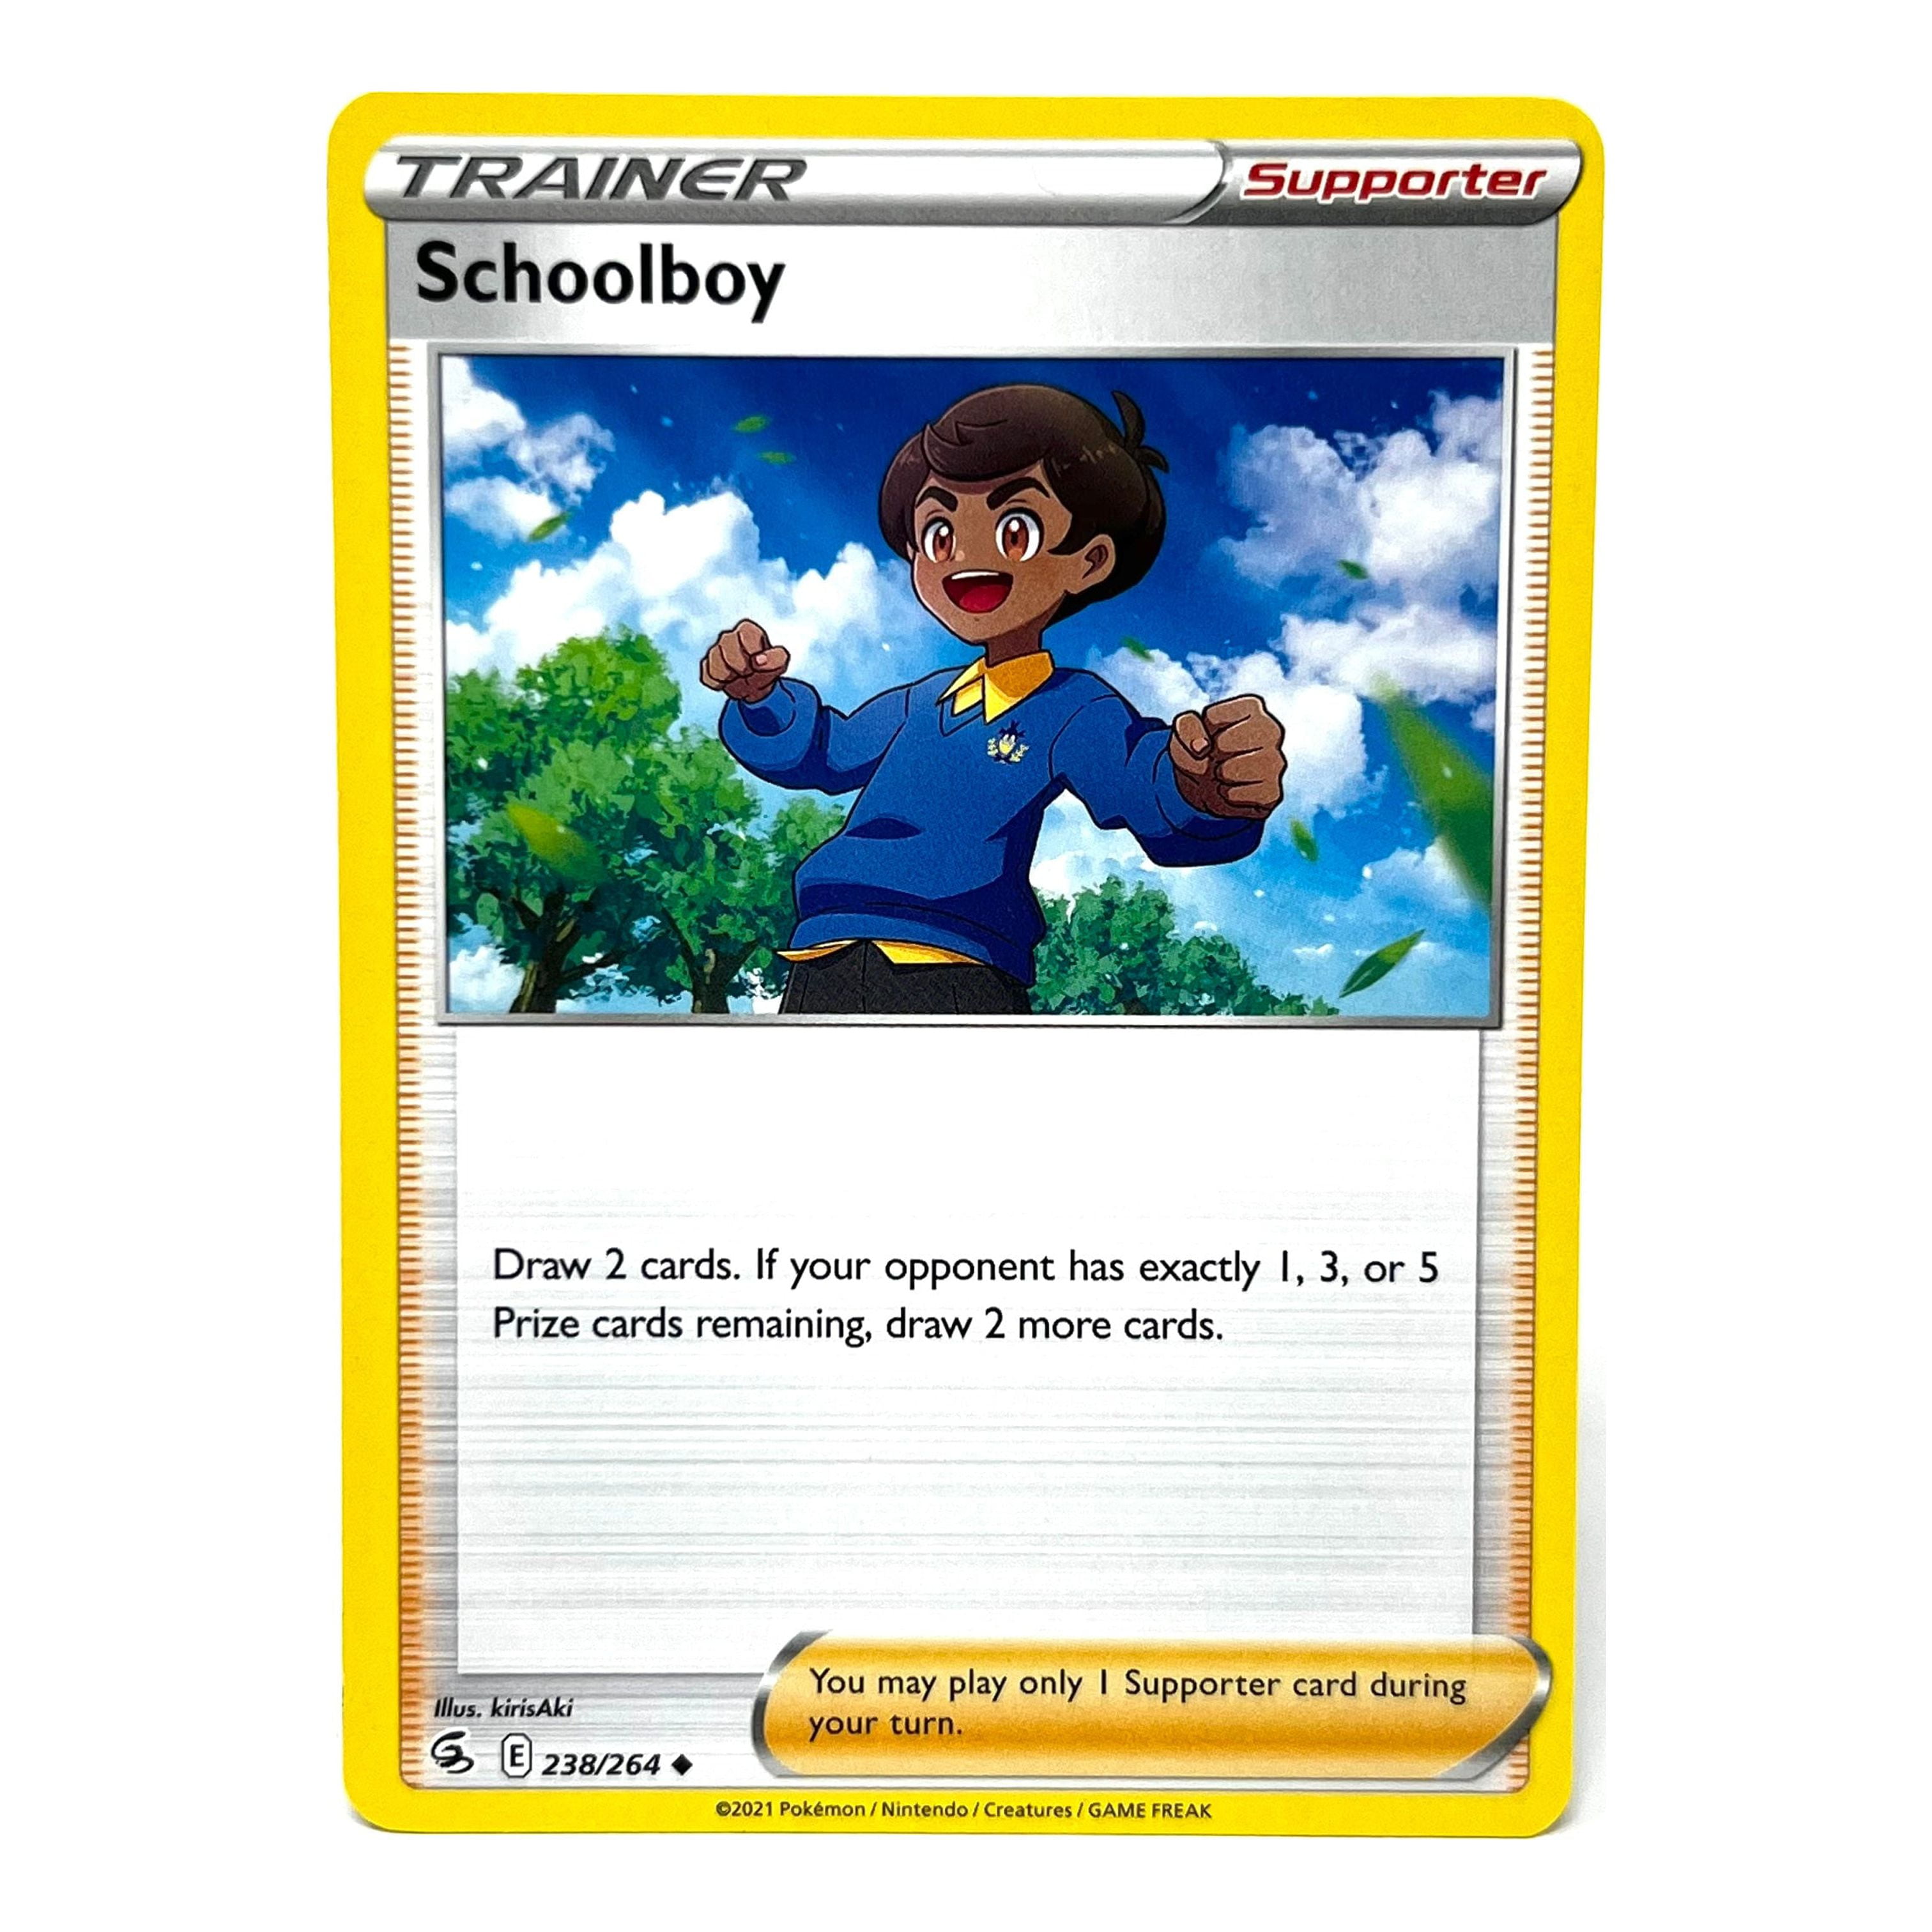 Album with 12 pages for Pokémon cards with Lucario